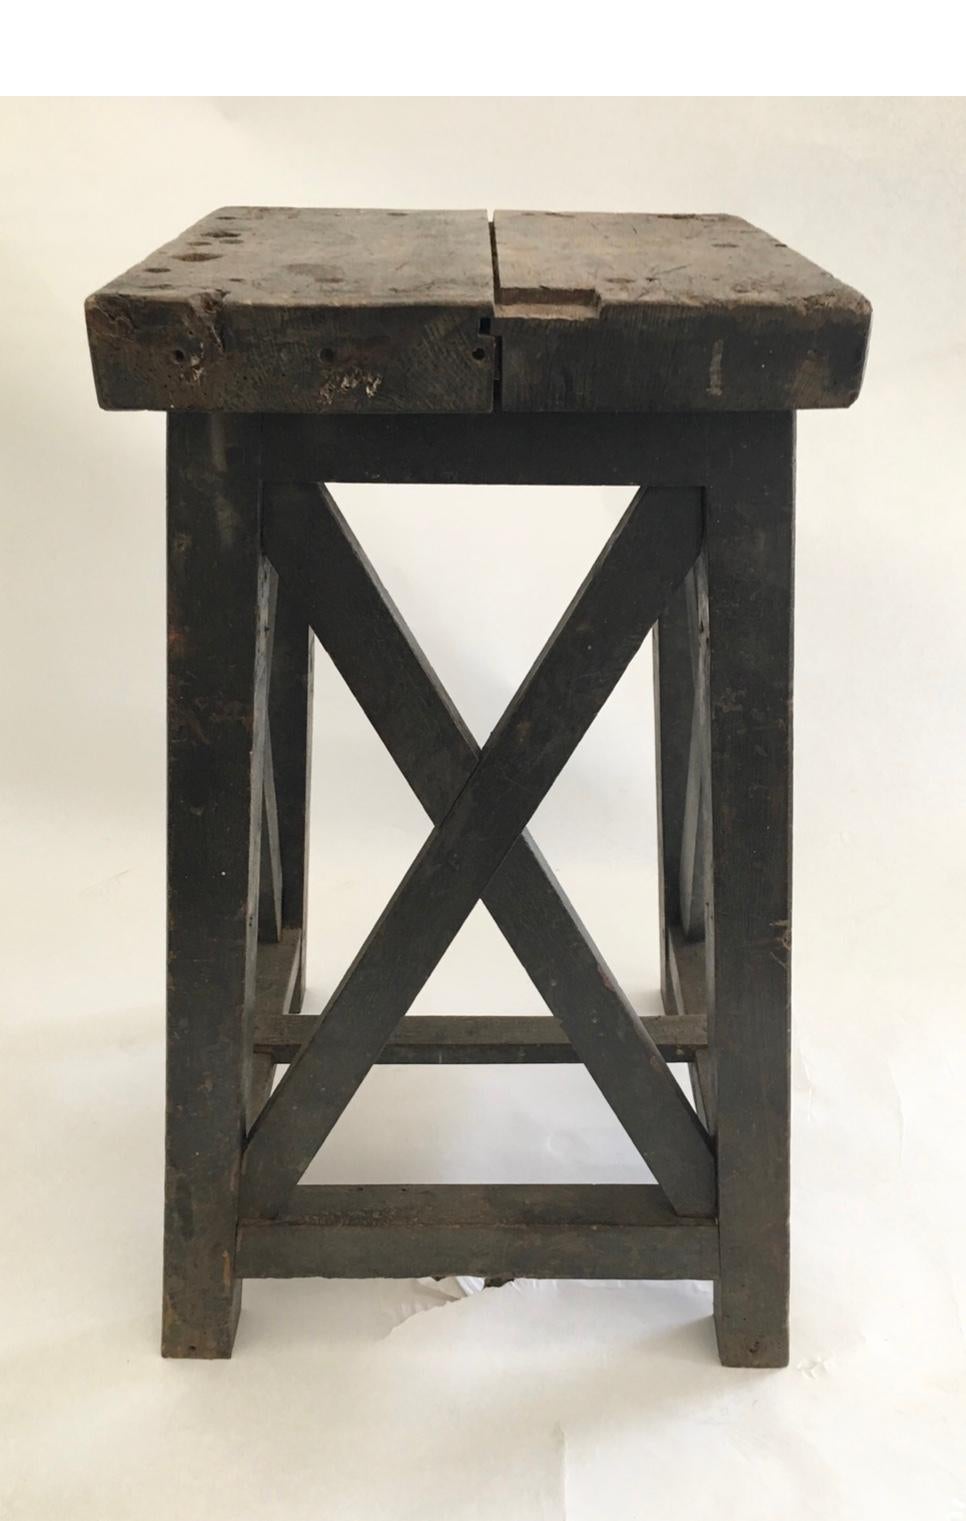 Beautiful early 19th century pedestal, all wood constructed with no nails. The top measures 15.5 inches square, and 19 inches square at the bottom.